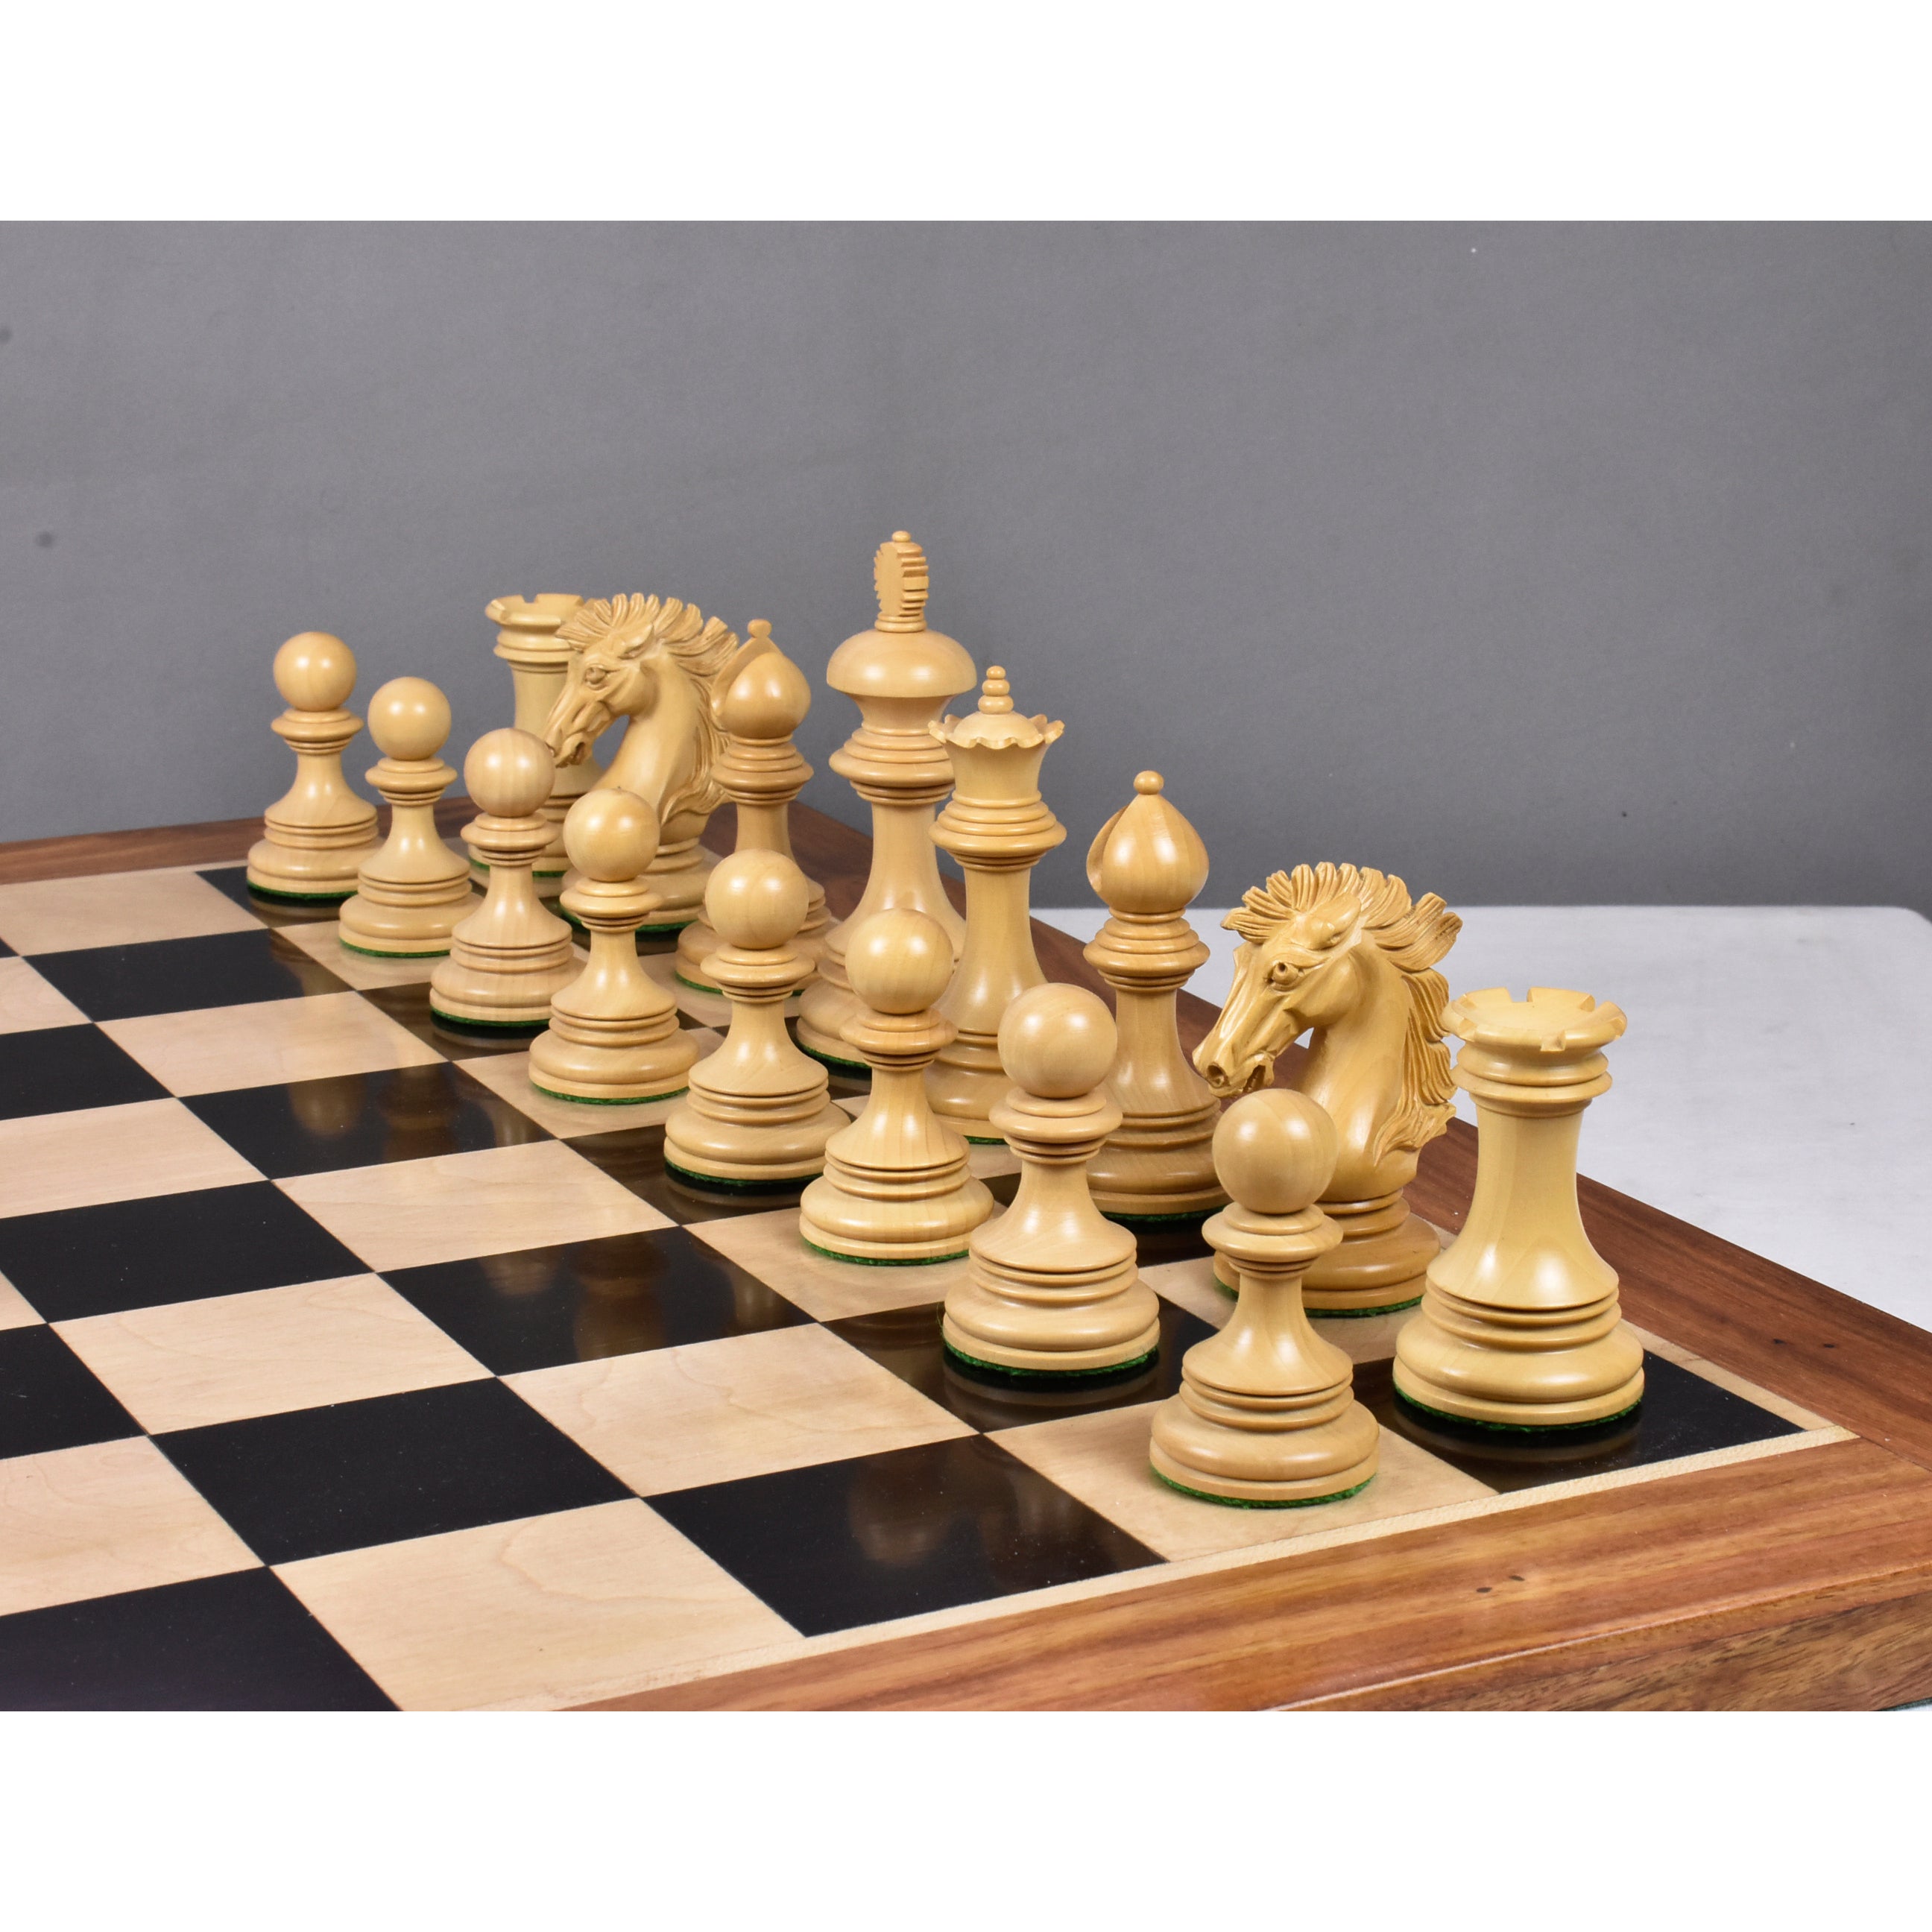 The Mammoth Ivory Collector Series Luxury Chess Set